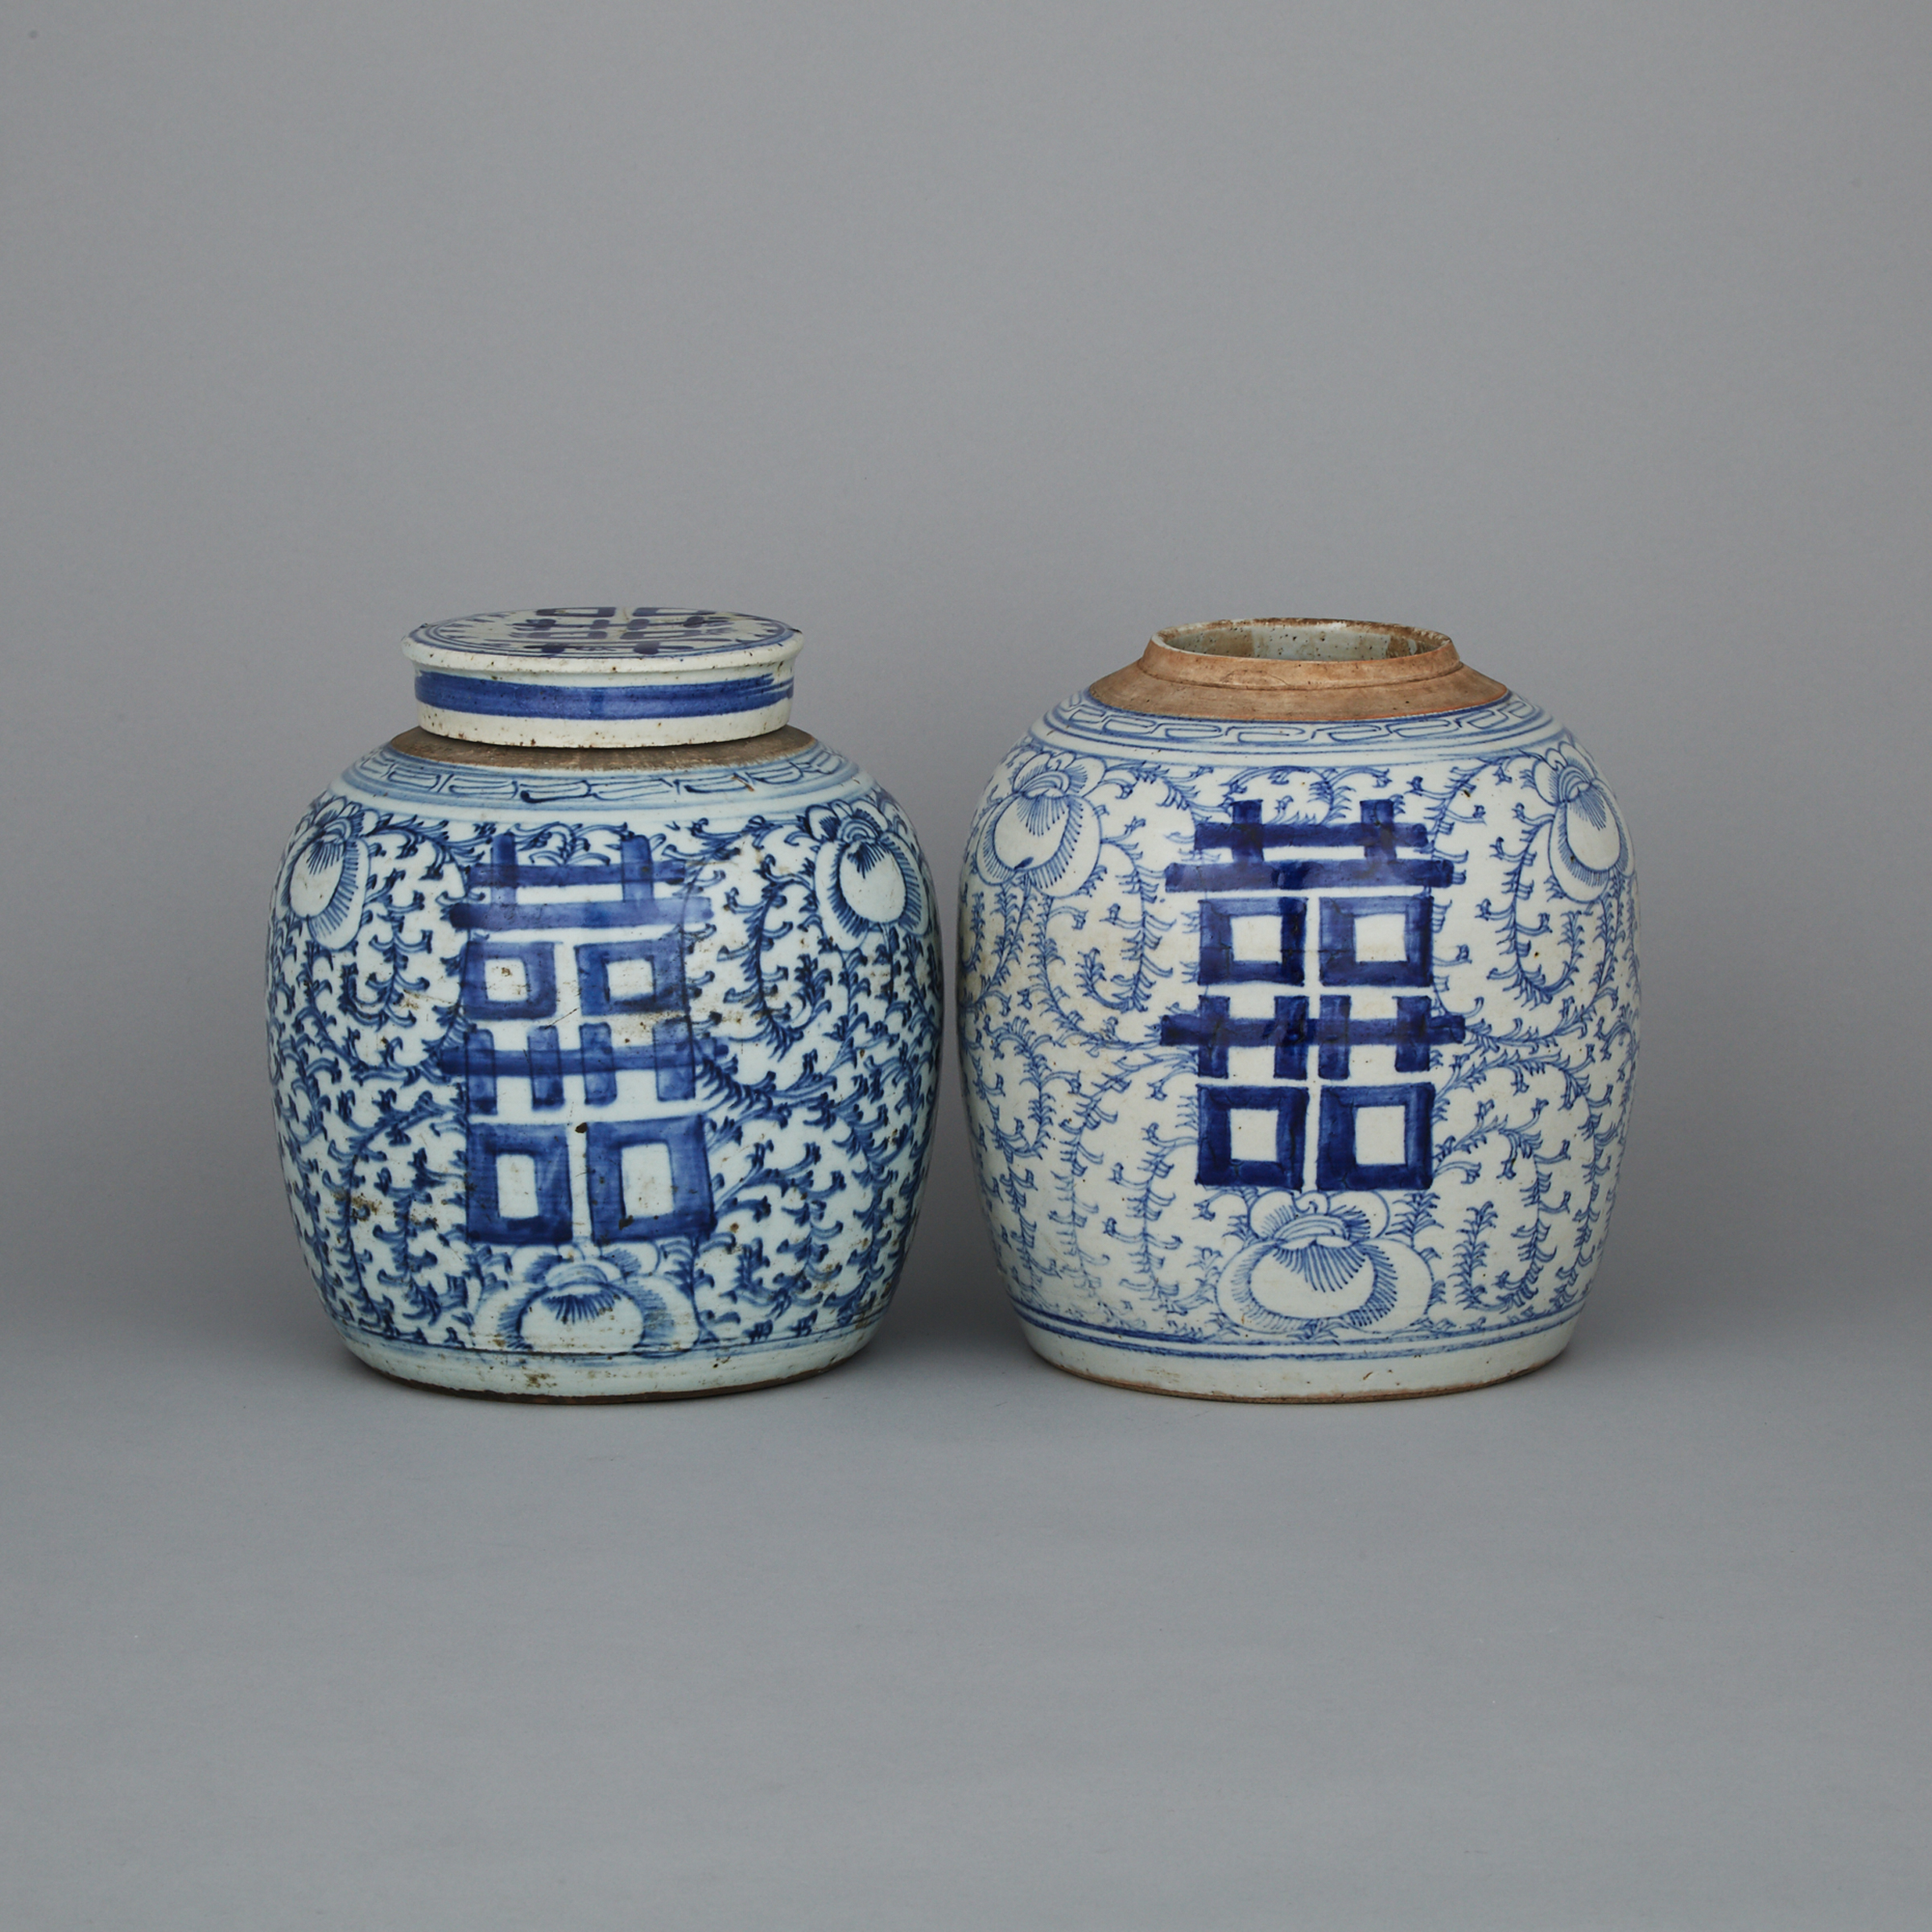 Two Blue and White ‘Double Happiness’ Ginger Jars, 19th Century